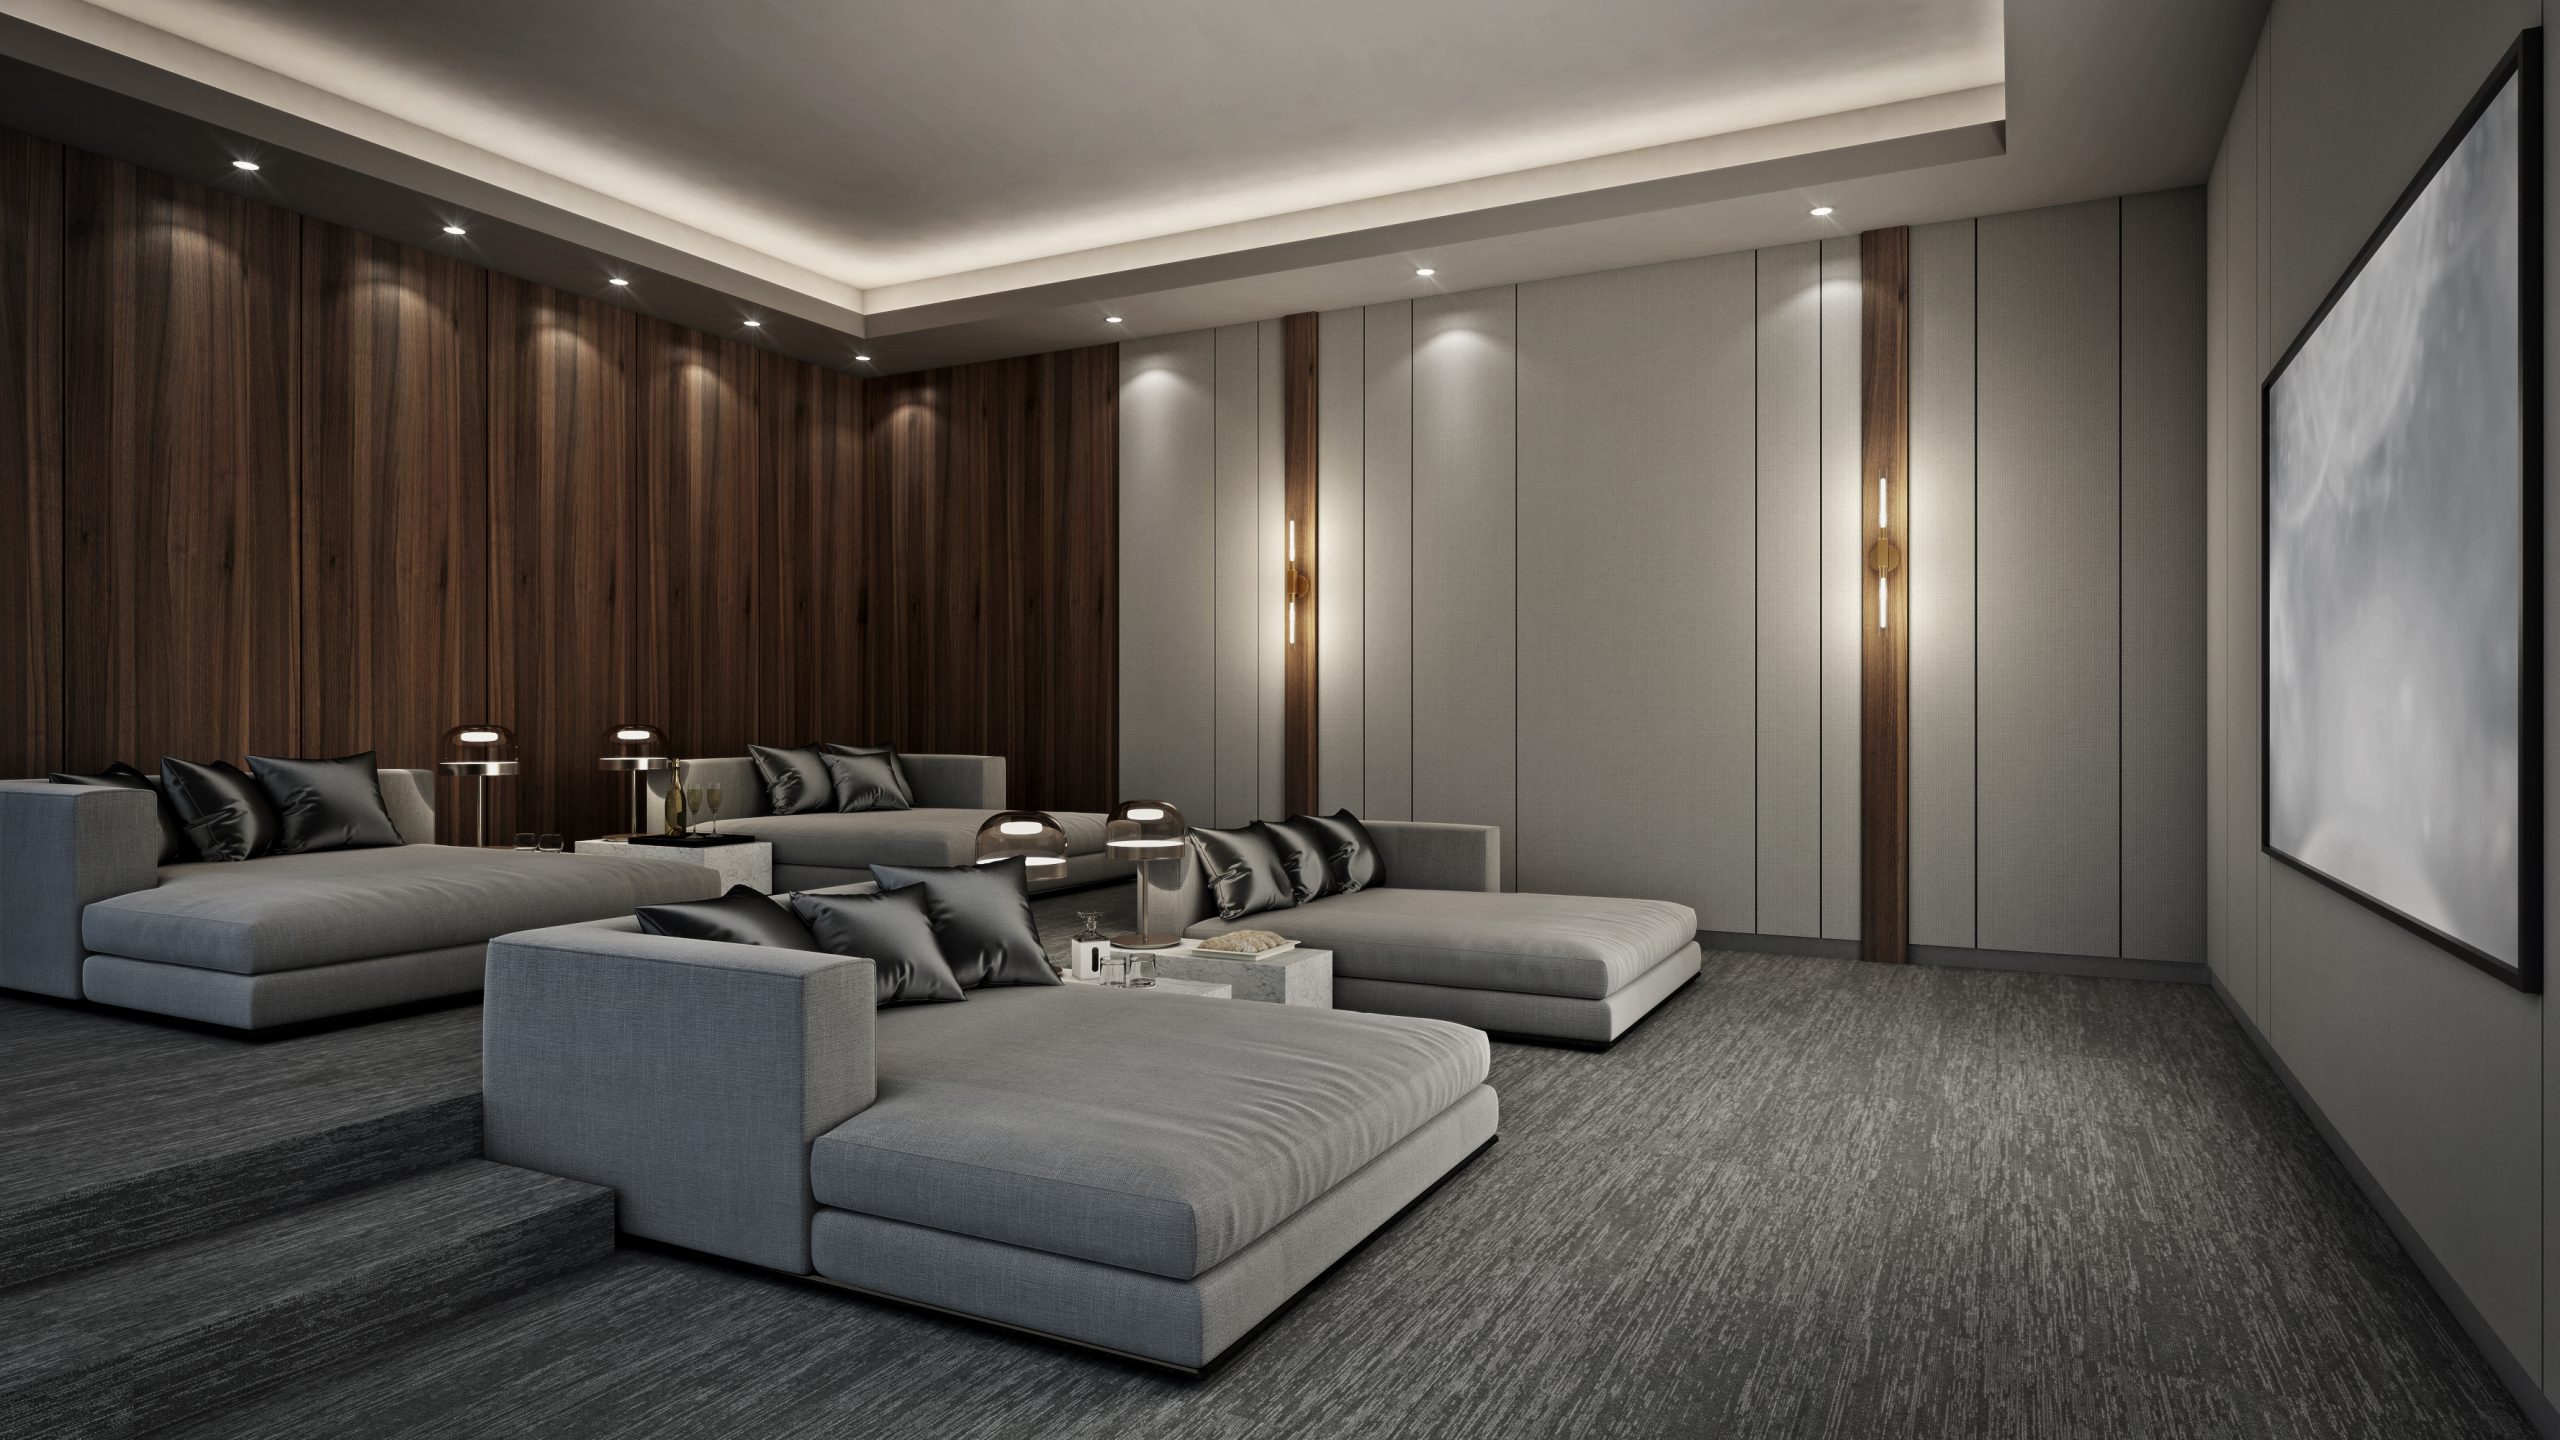 The Best Luxury Amenities for Your Home: From Spas to Home Theaters